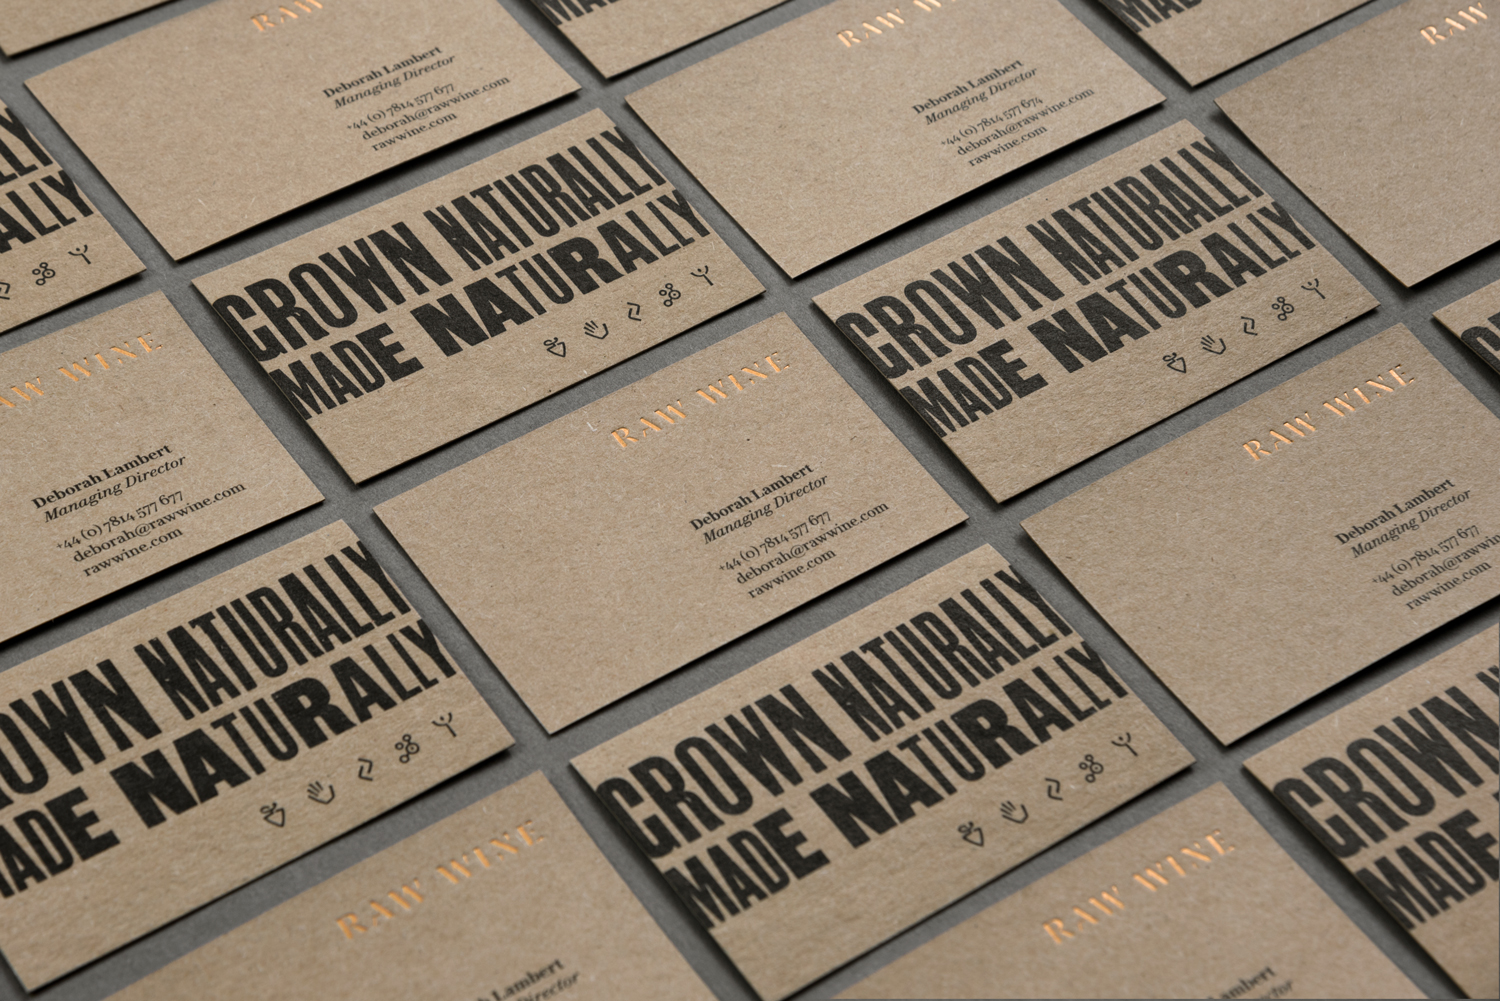 Logotype, letterpress business cards, stationery and brochures by The Counter Press for international wine fair Raw Wine